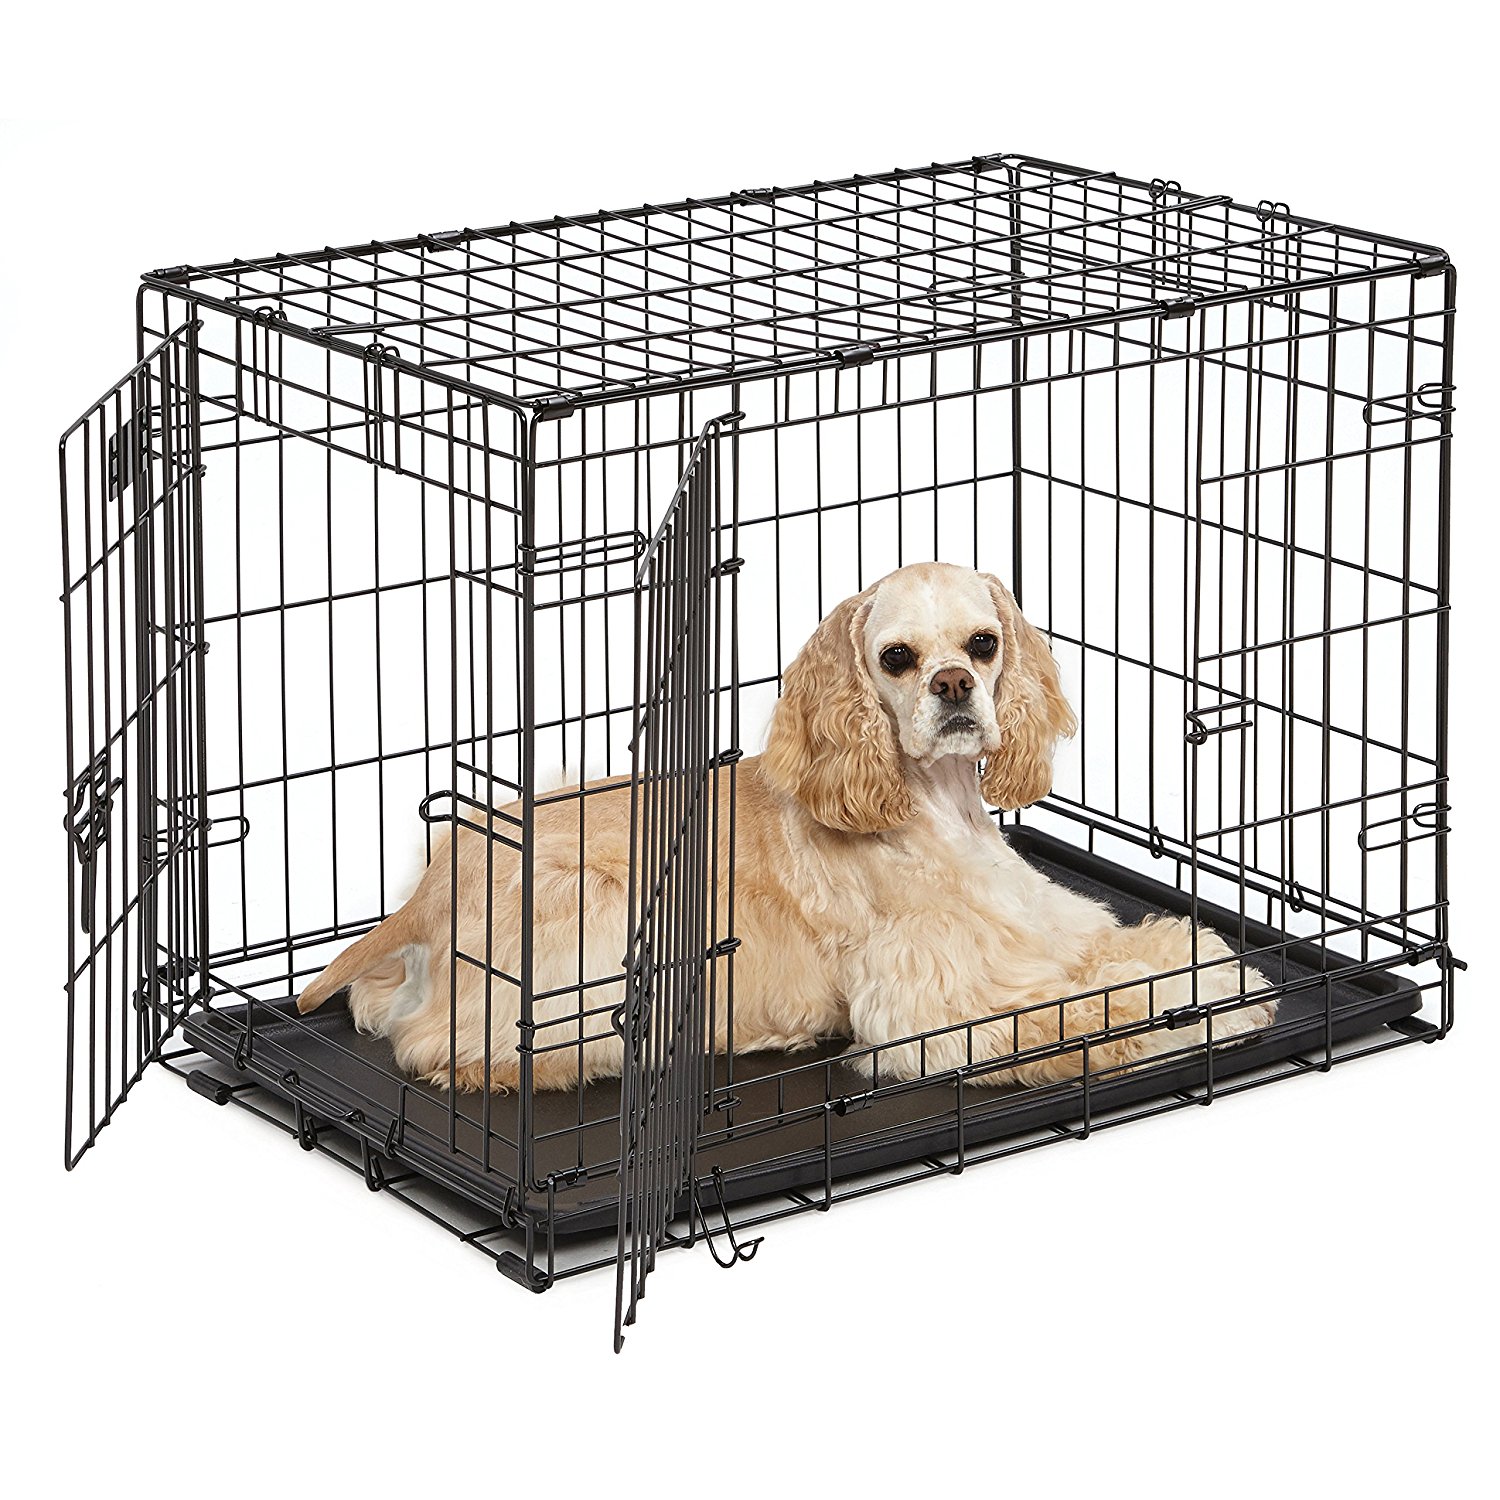 MidWest iCrate 30″ Double Door Folding Dog Crate Only $20.39! (Reg $69.99)